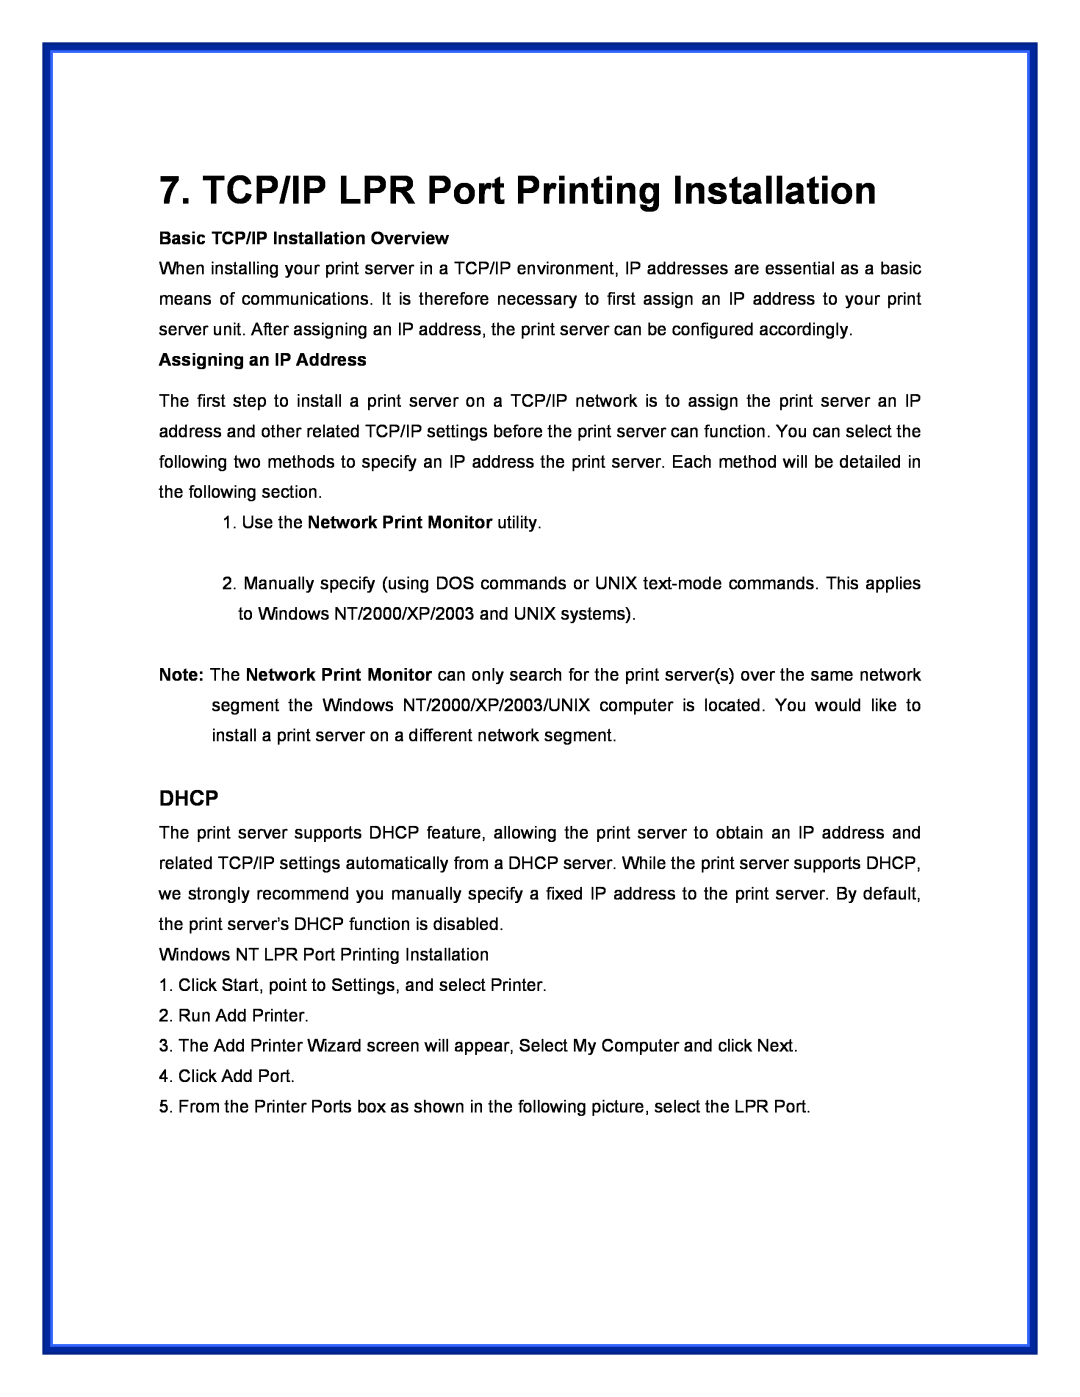 Epson (USB 2.0) TCP/IP LPR Port Printing Installation, Dhcp, Basic TCP/IP Installation Overview, Assigning an IP Address 